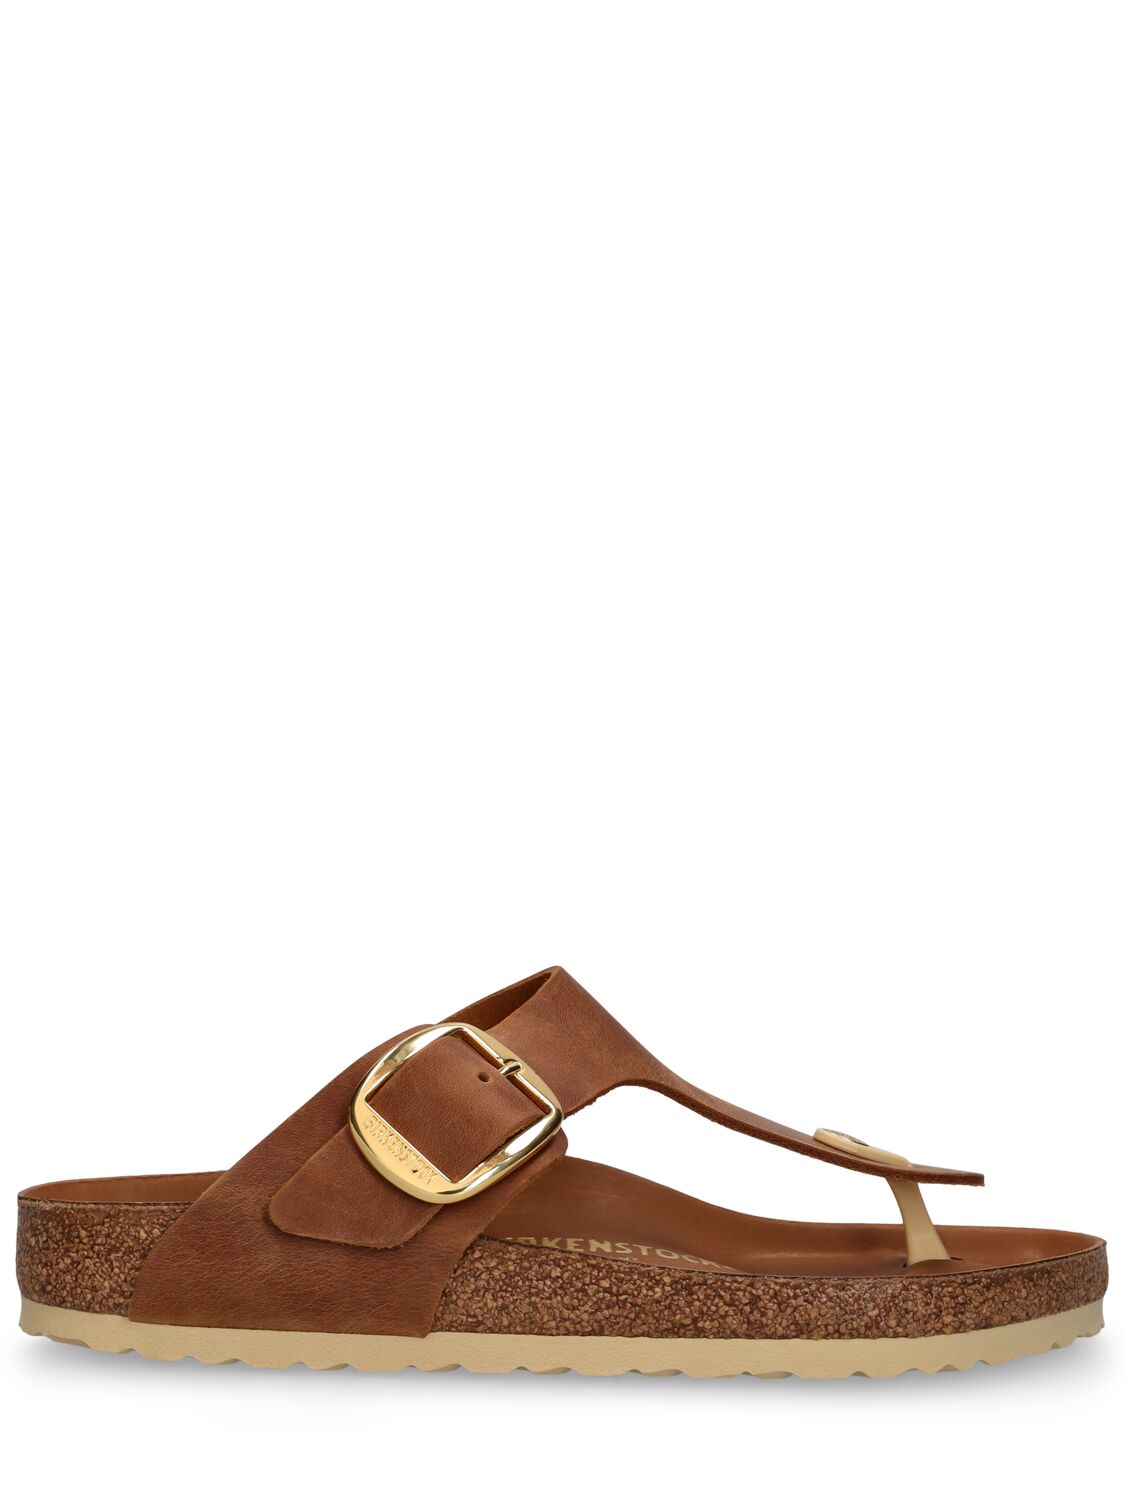 Birkenstock Gizeh Big Buckle Oiled Leather Sandals In Brown